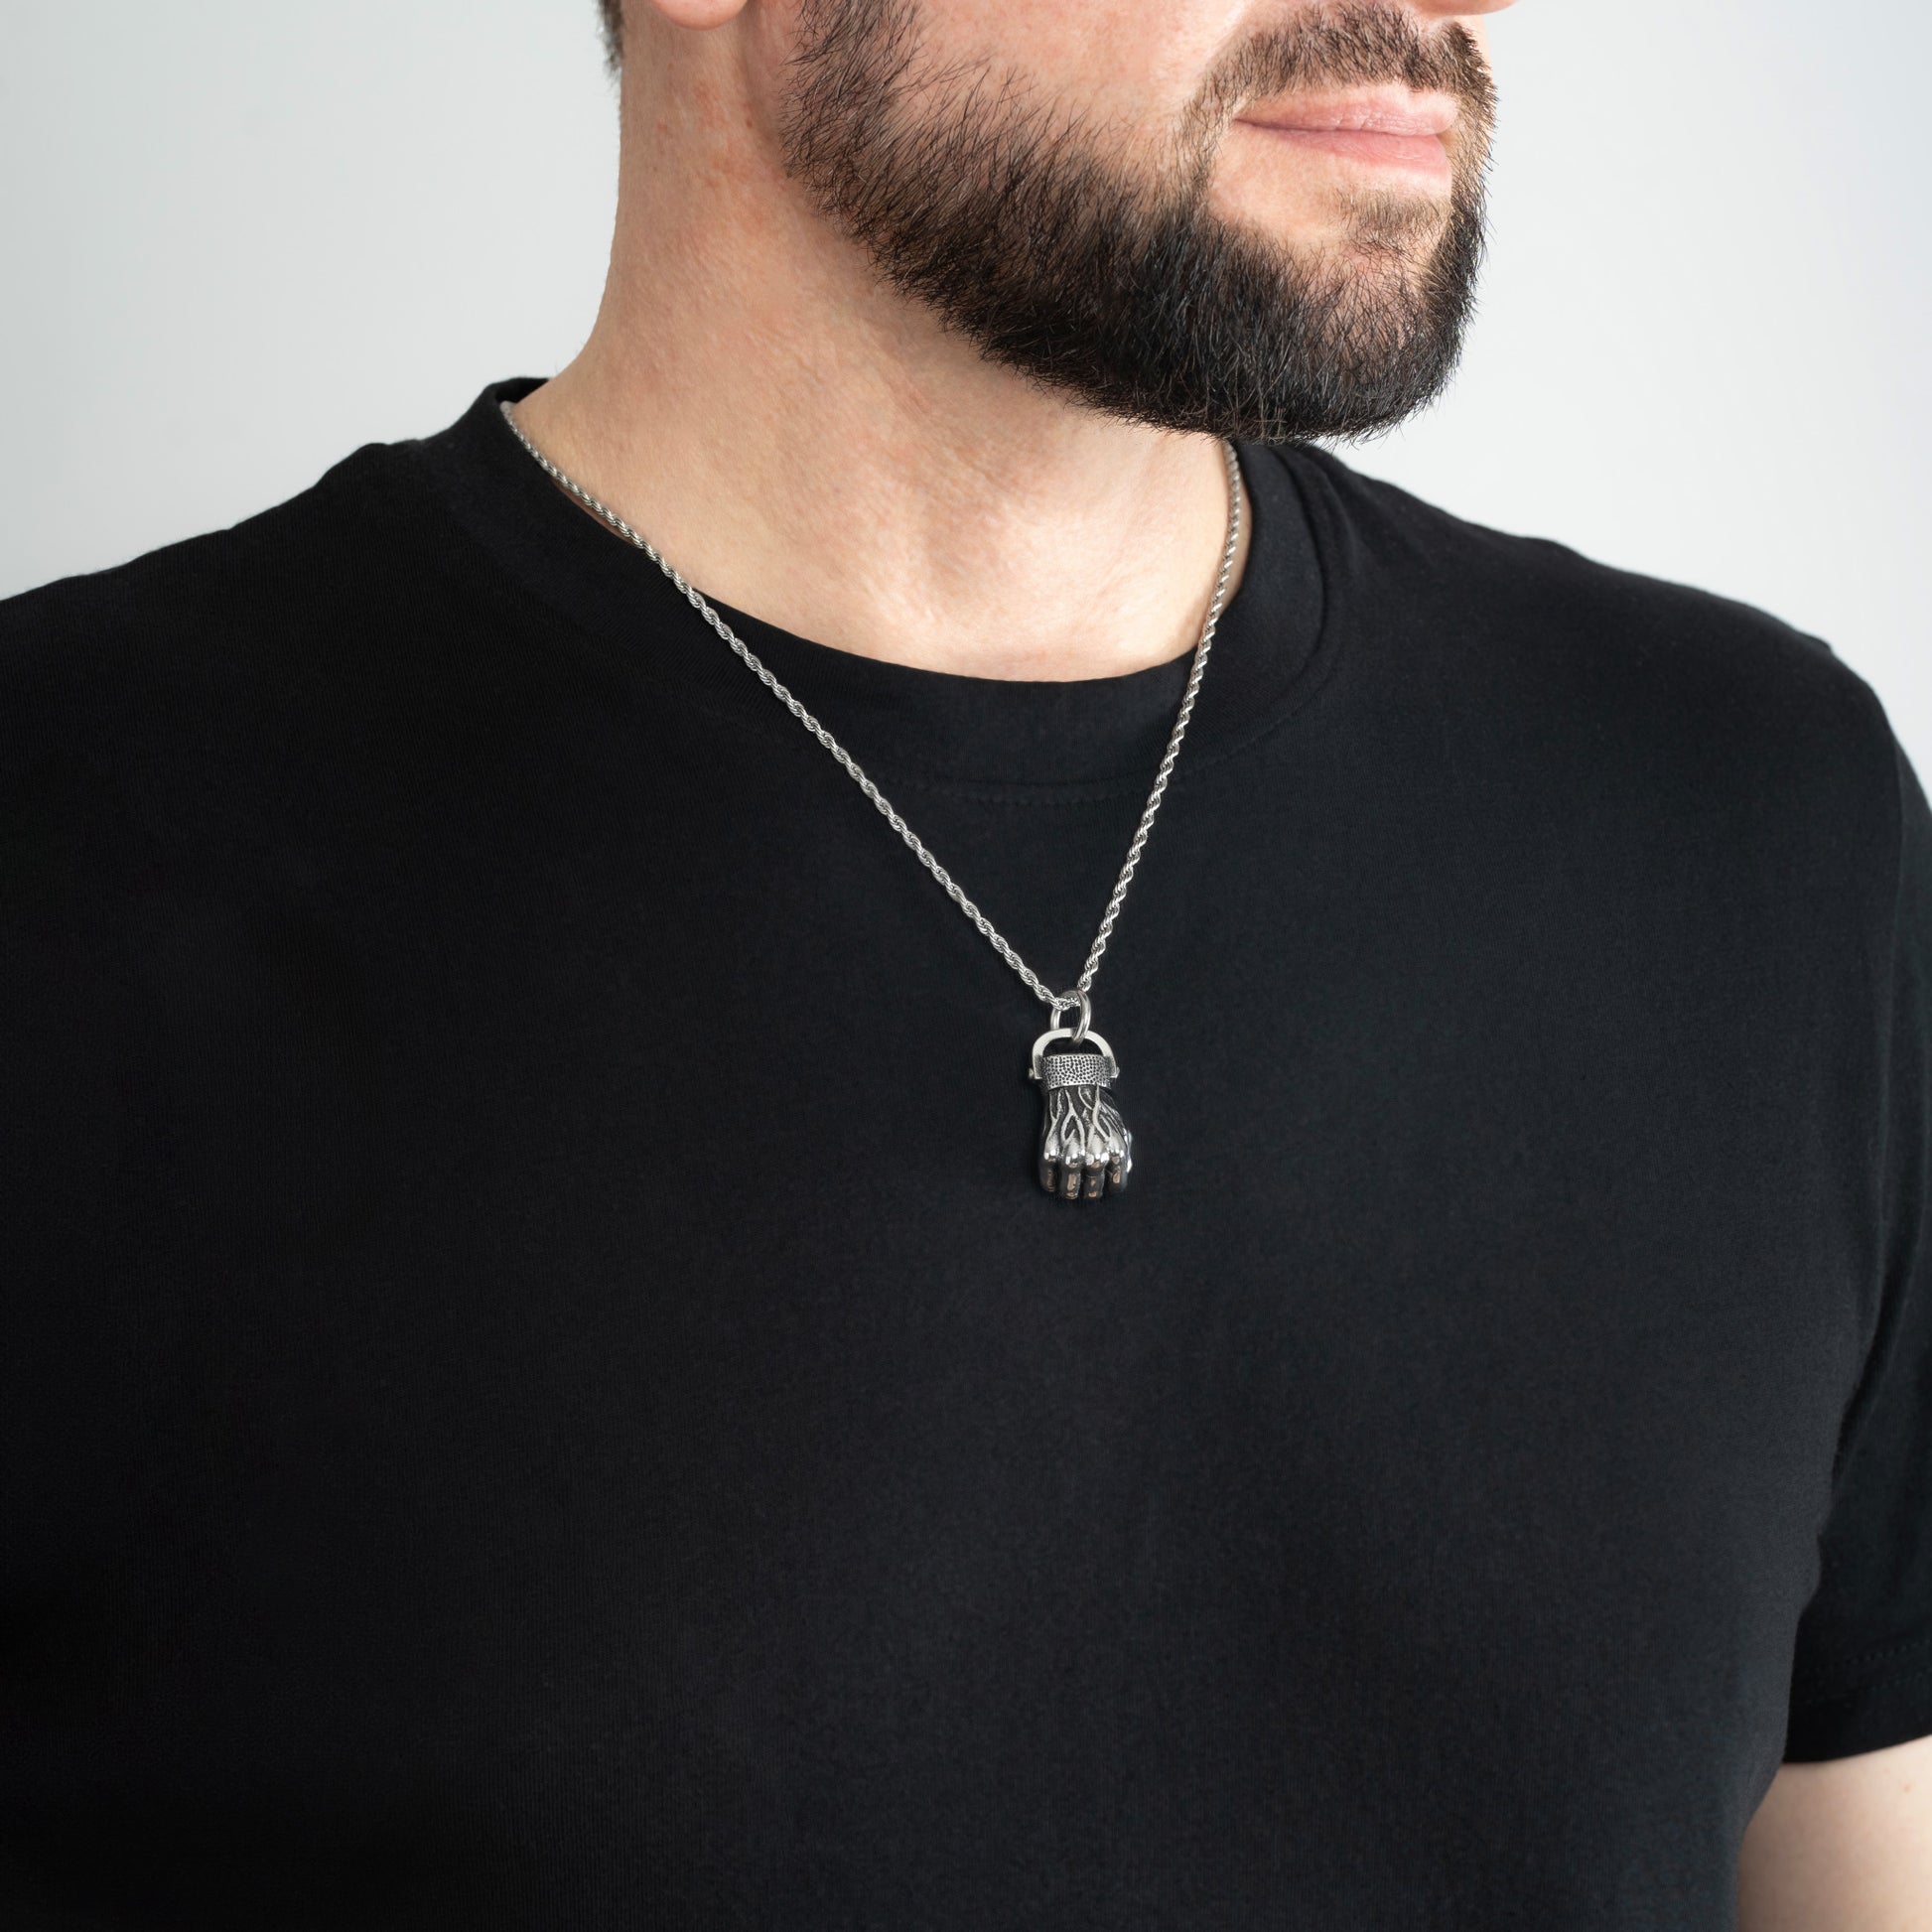 A male model in a black t-shirt wearing a Fist Silver Pendant with a Silver Rope chain 22 inches.